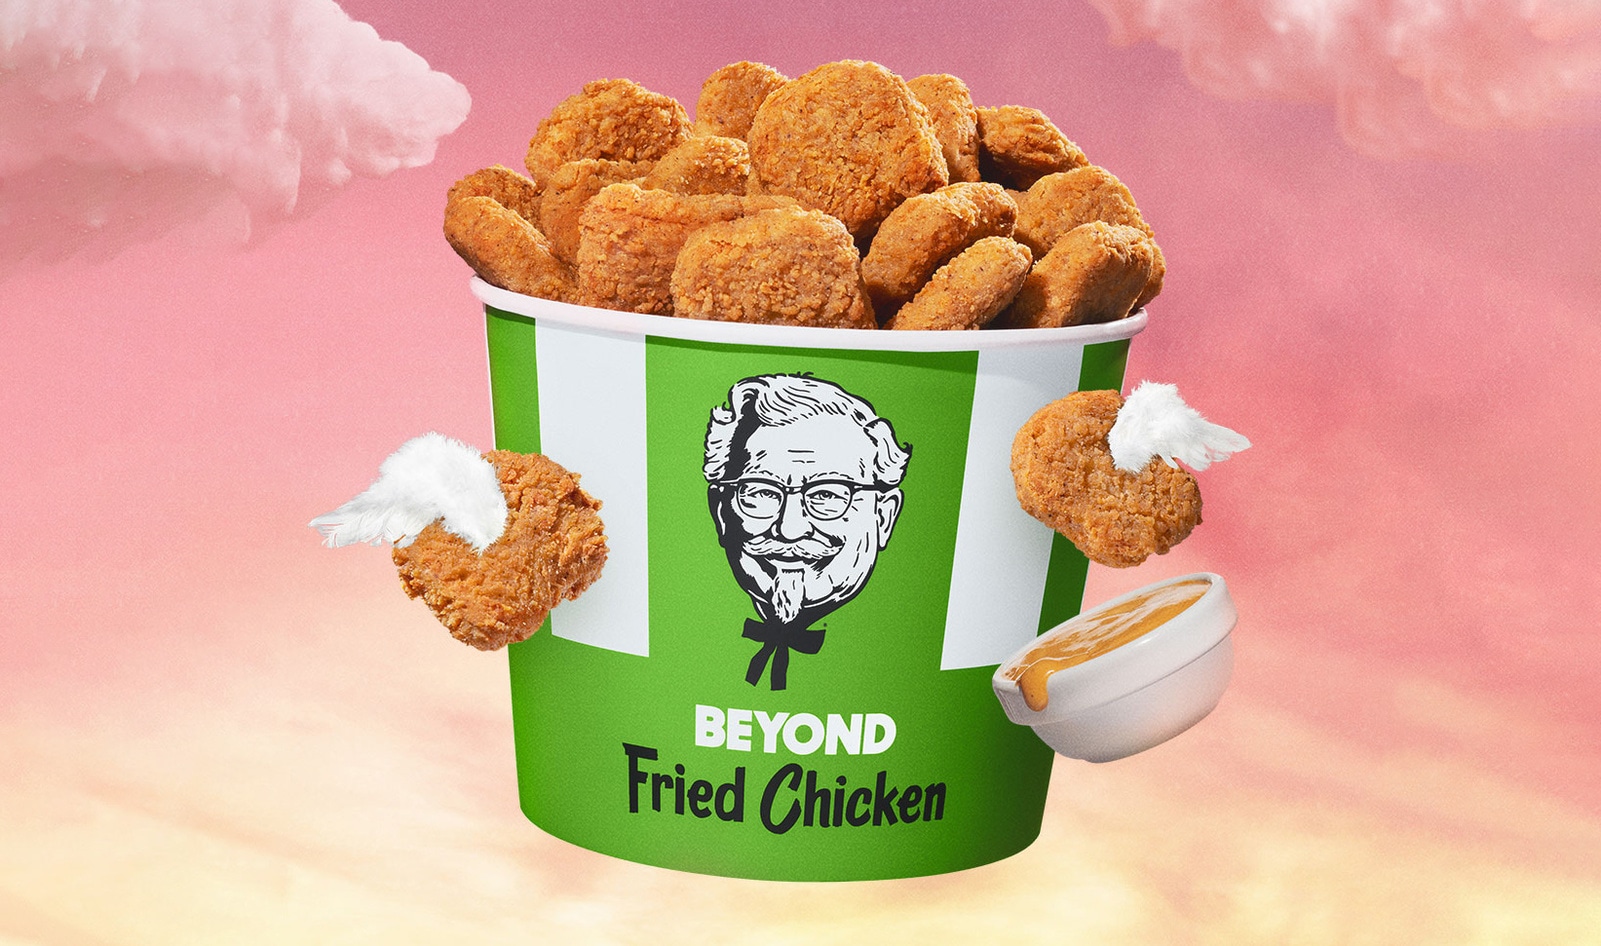 KFC Just Launched Vegan Fried Chicken at More than 4,000 Locations